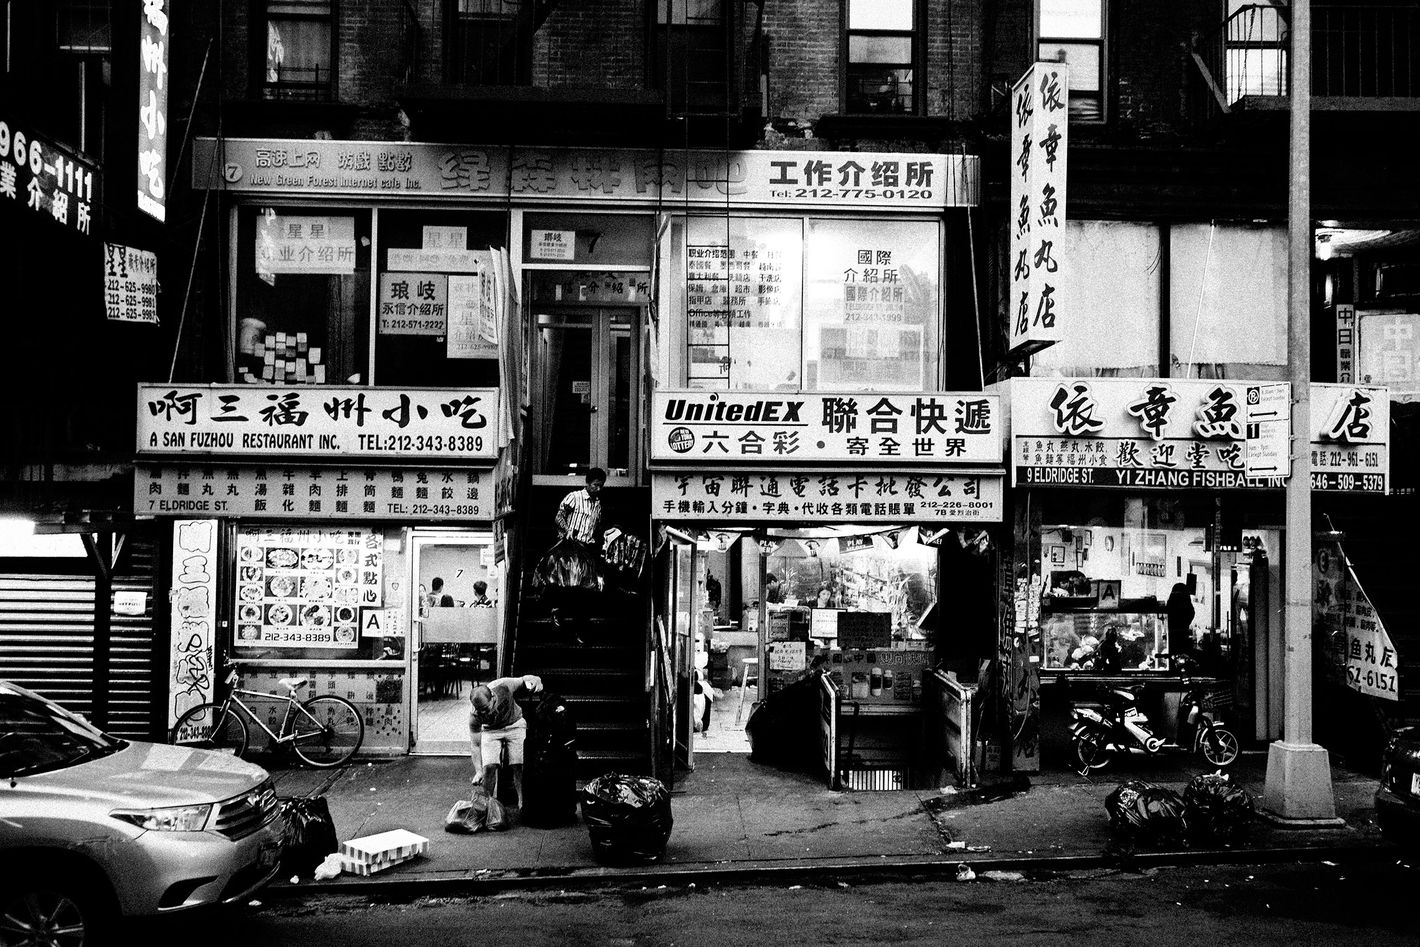 Chinatown/Lower East Side Preservation